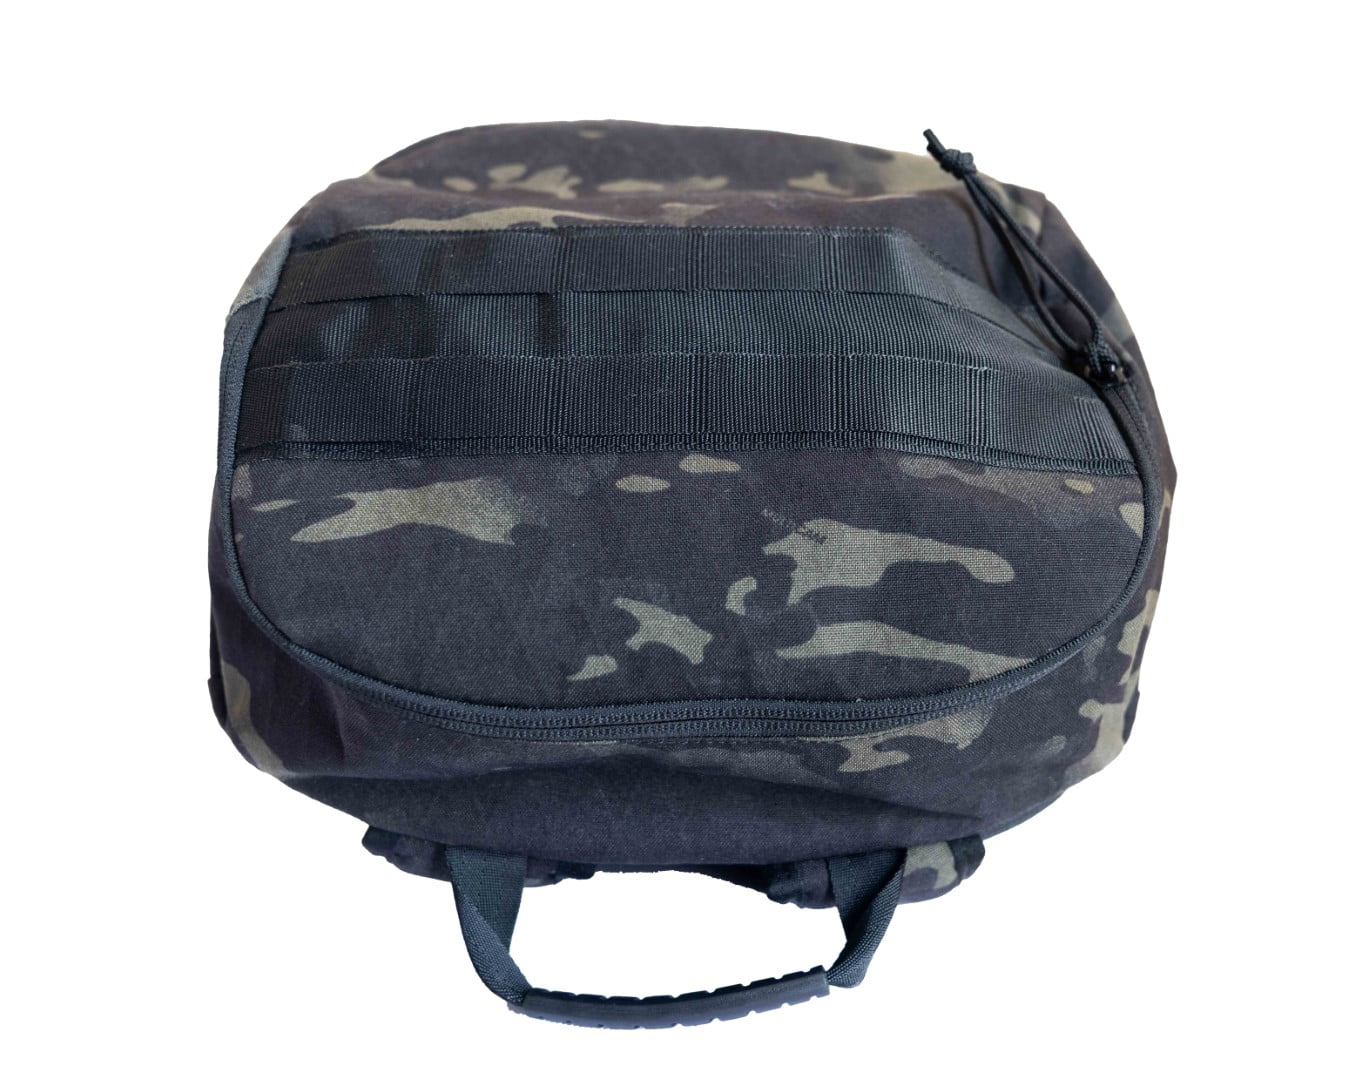 new! rise xl multicam with molle system